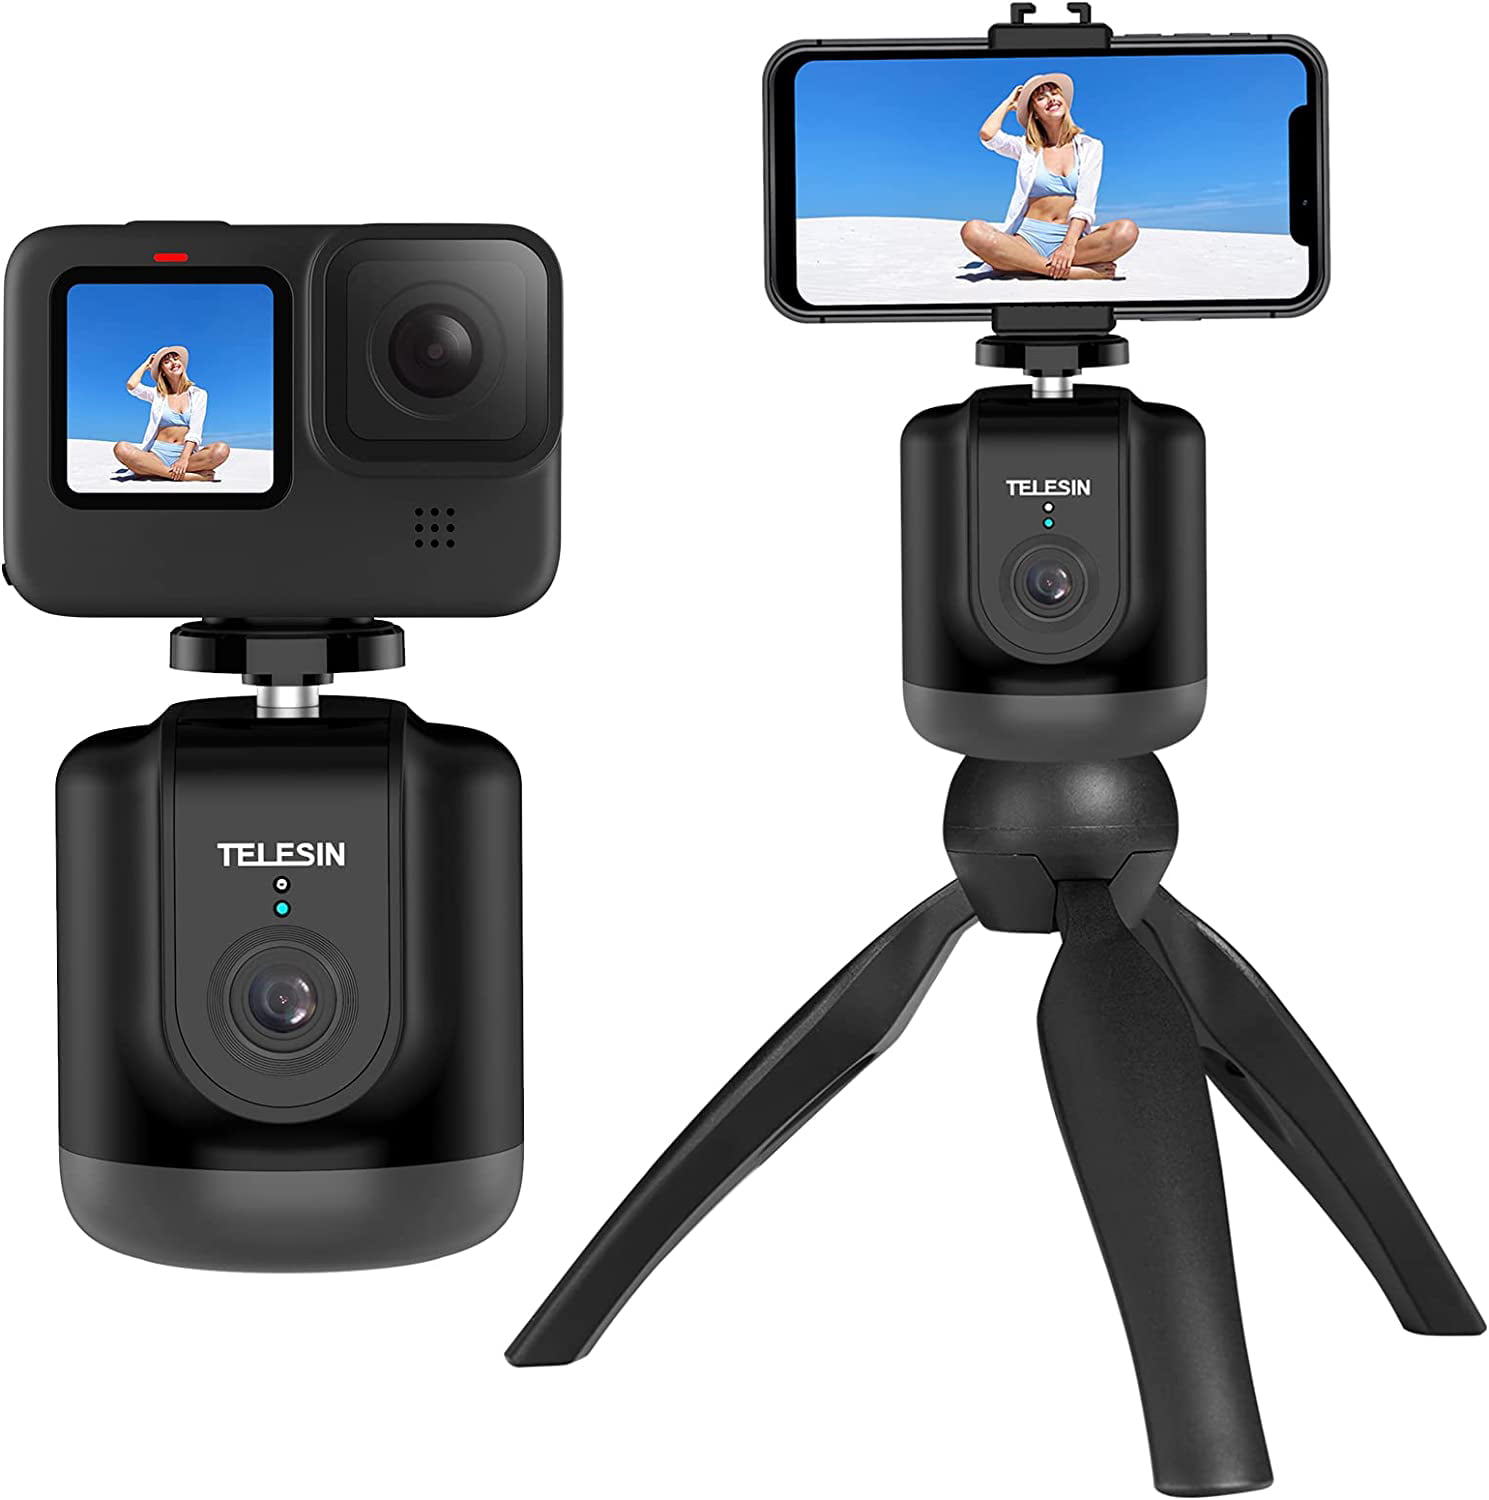 No App Battery Operated Smart Video Mount for iPhone Android Phone 360 ° Auto Track Tripod with Camera Remote Shutter Face Tracking Phone Holder 